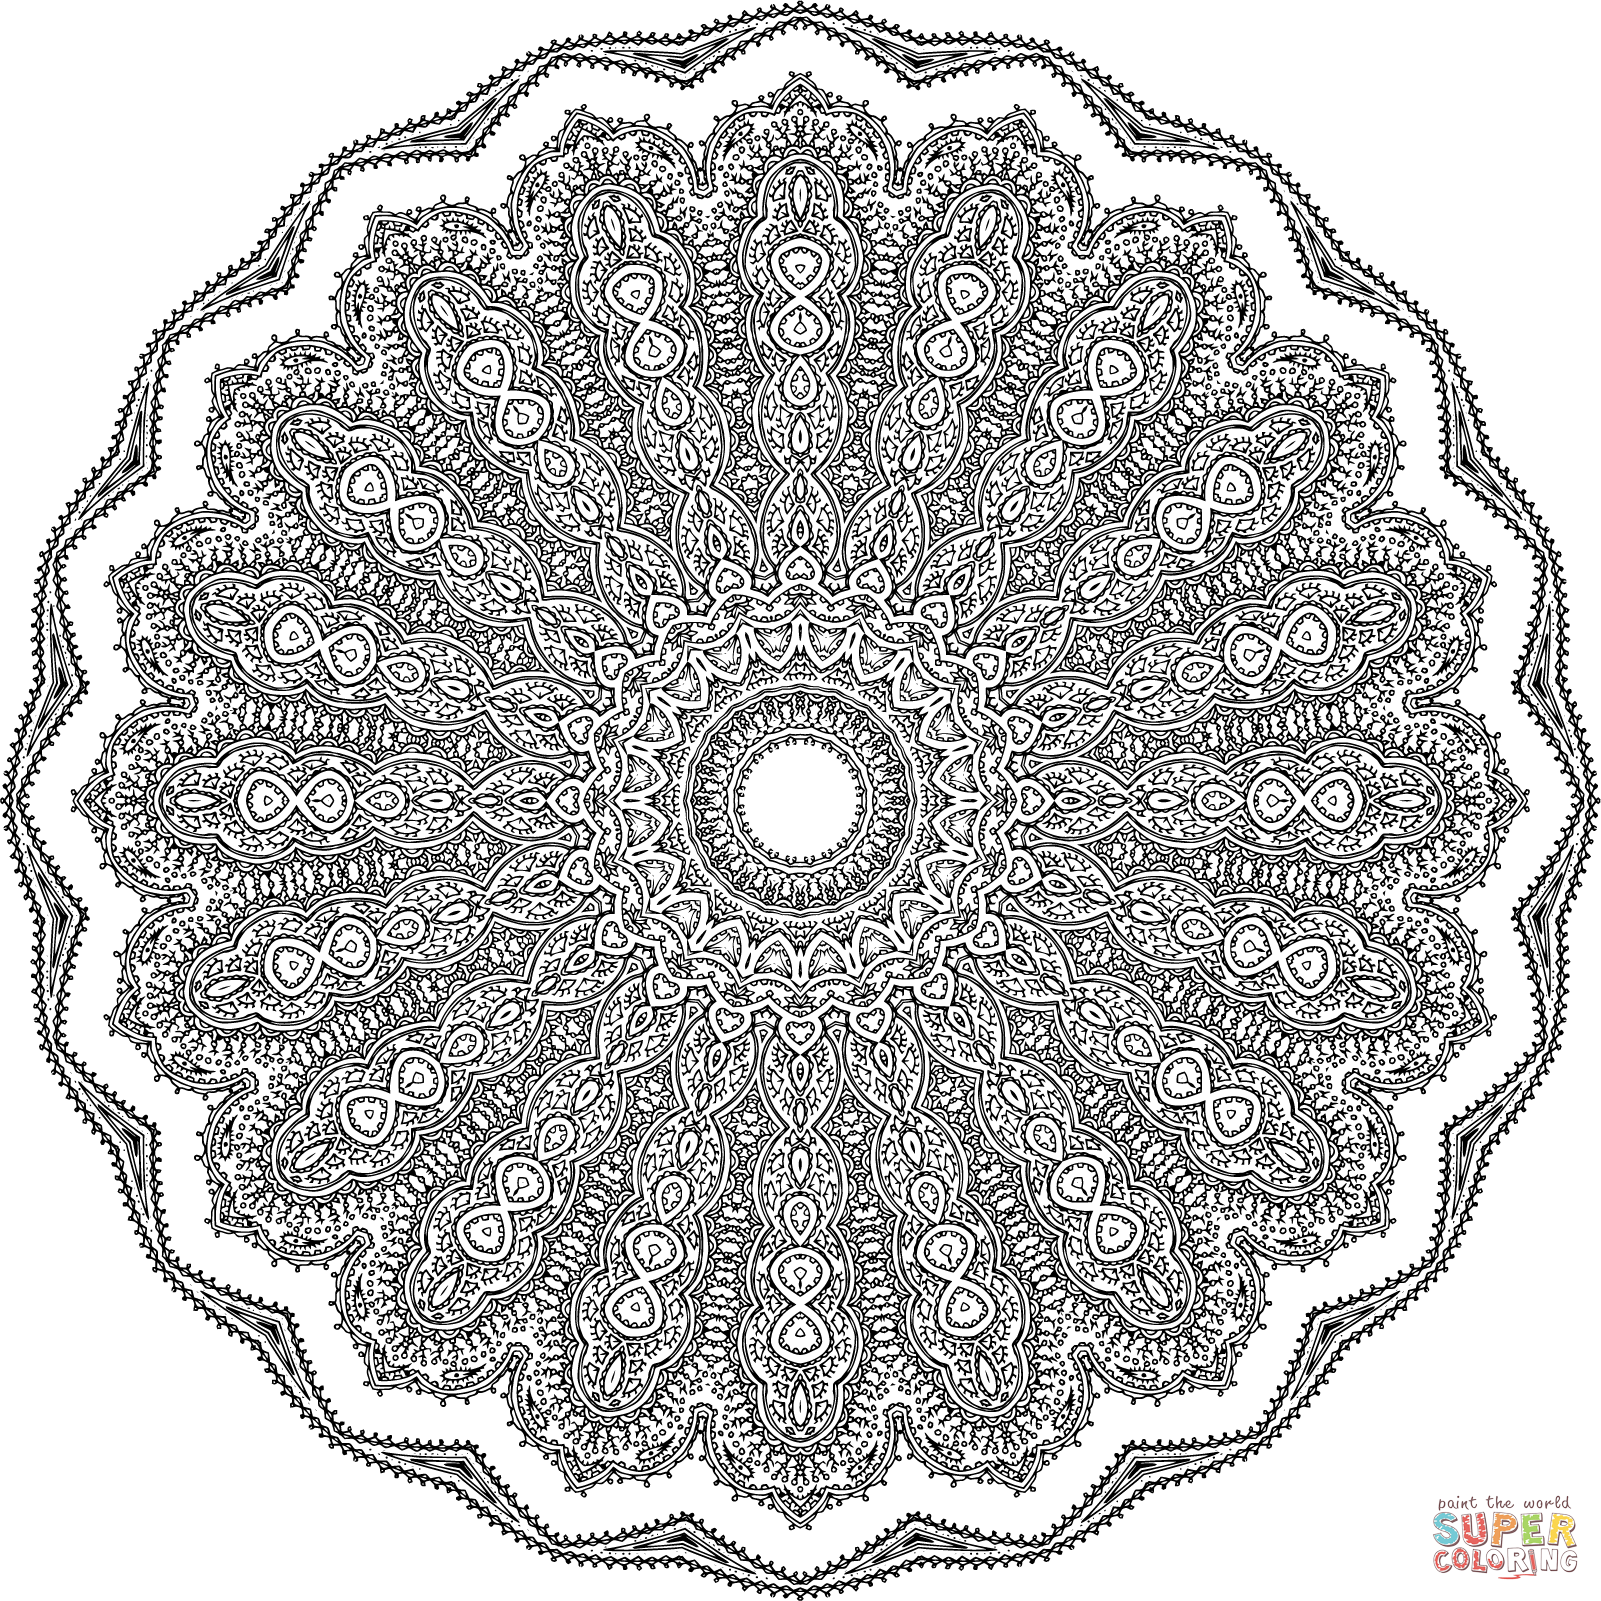 Intricate mandala coloring page free printable coloring pages